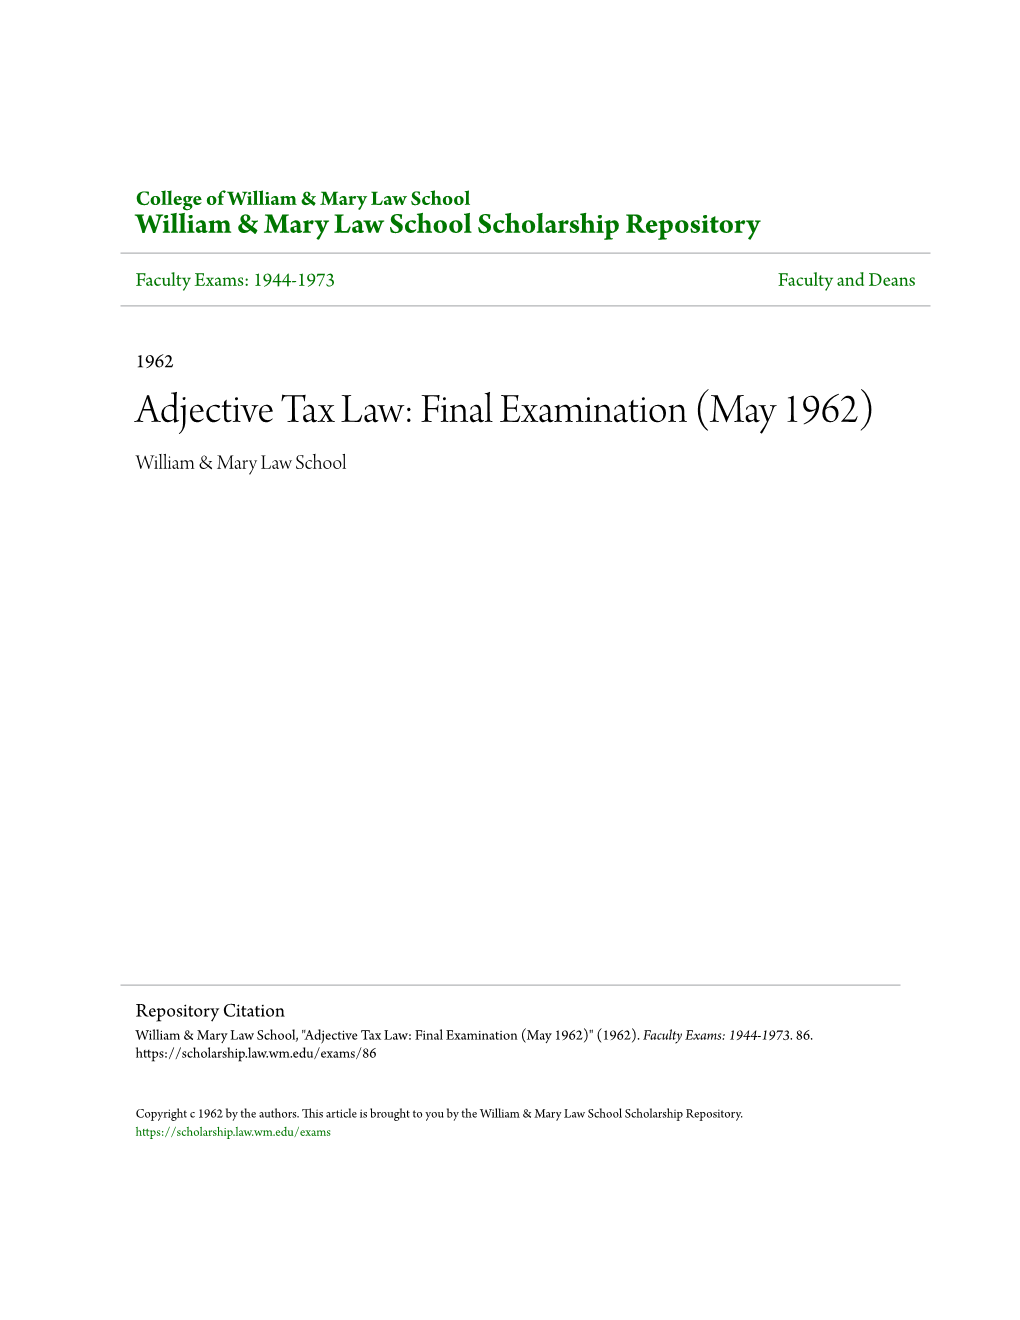 Adjective Tax Law: Final Examination (May 1962) William & Mary Law School